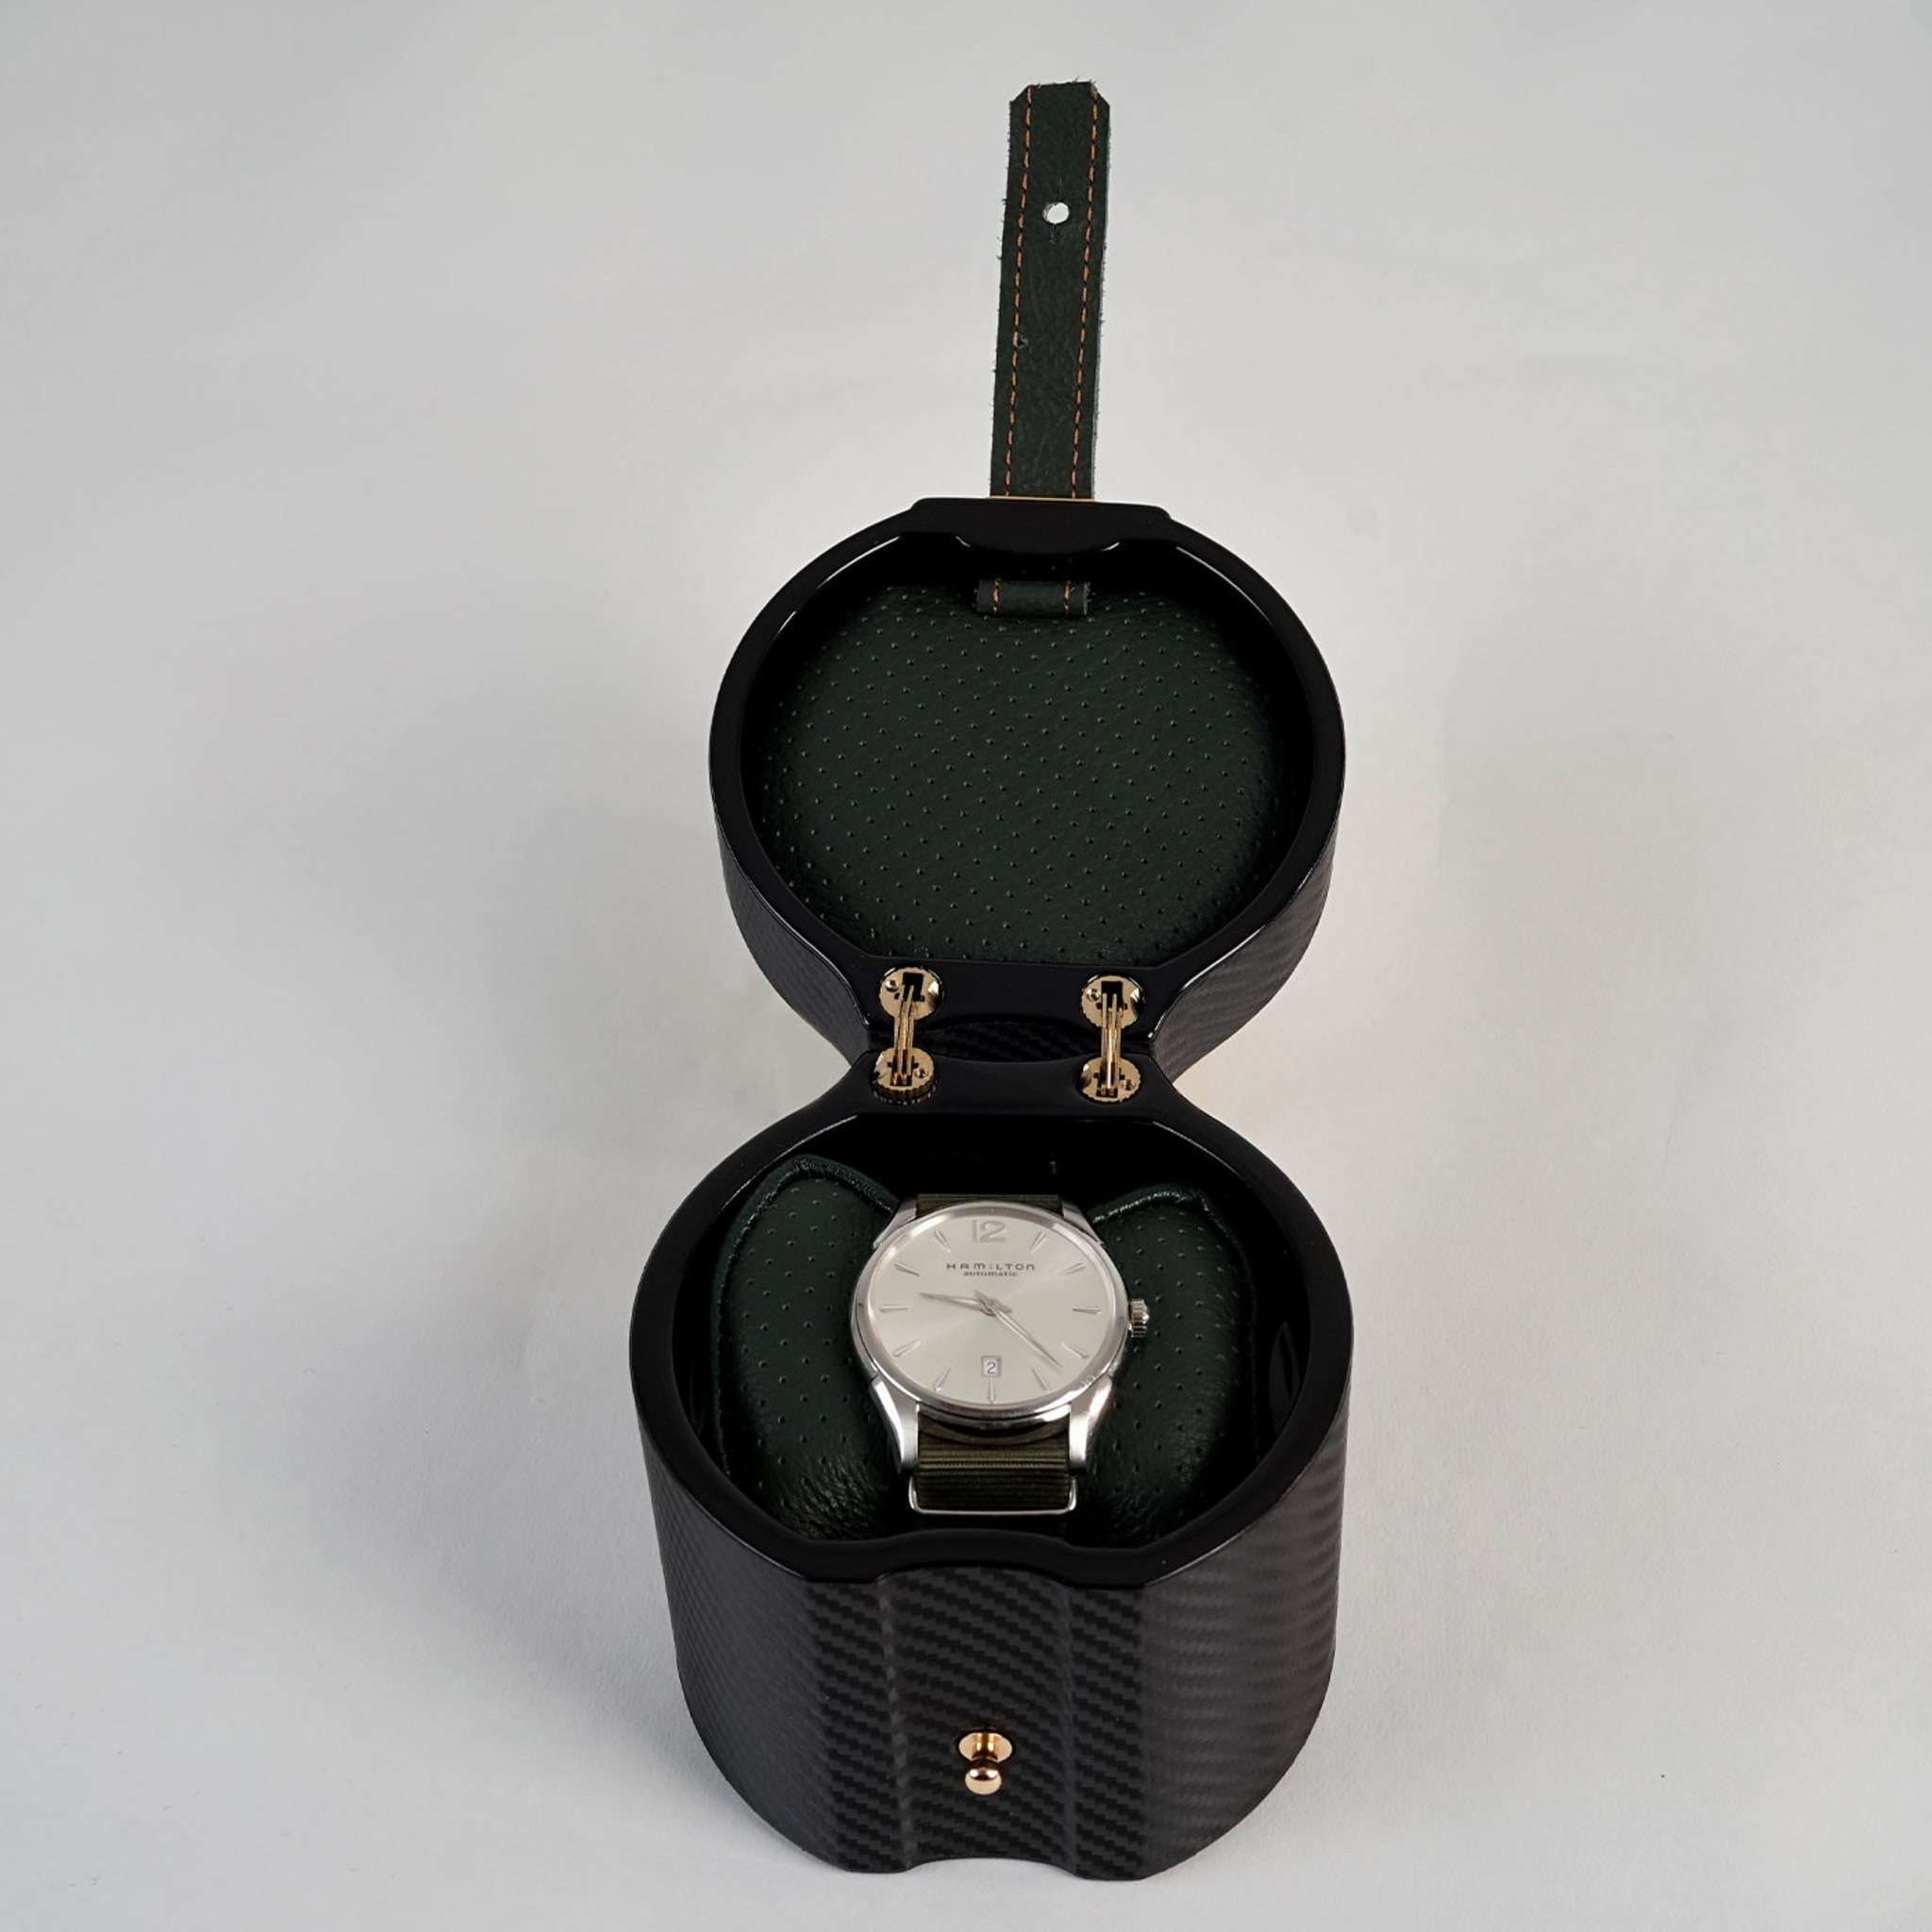 MT Travel Black and Green Watch Case - Alternative view 2